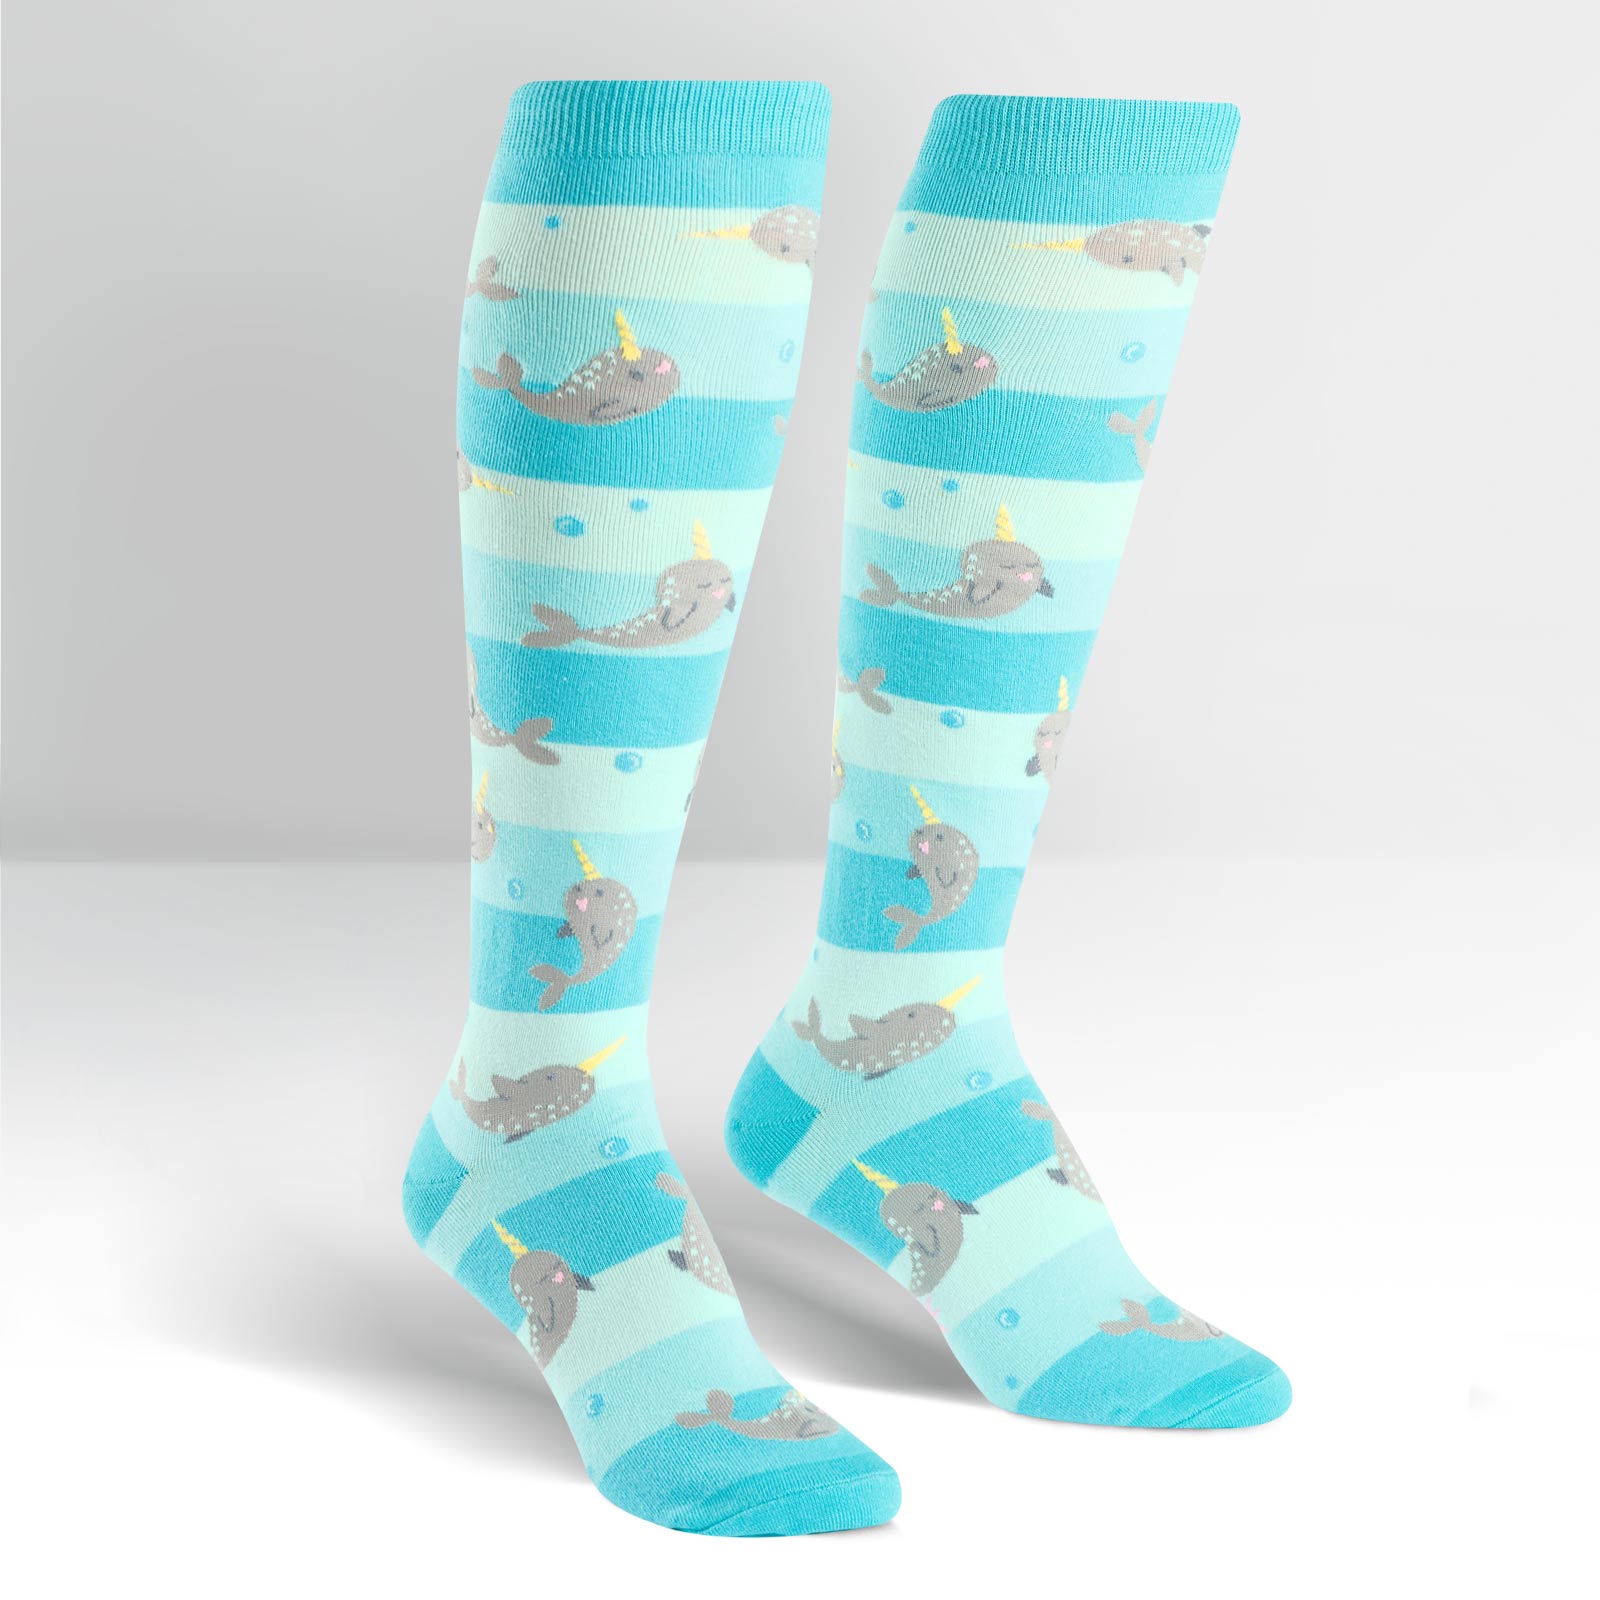 Unicorn of the Sea Women's Socks by Sock it To Me - Compassionate Closet